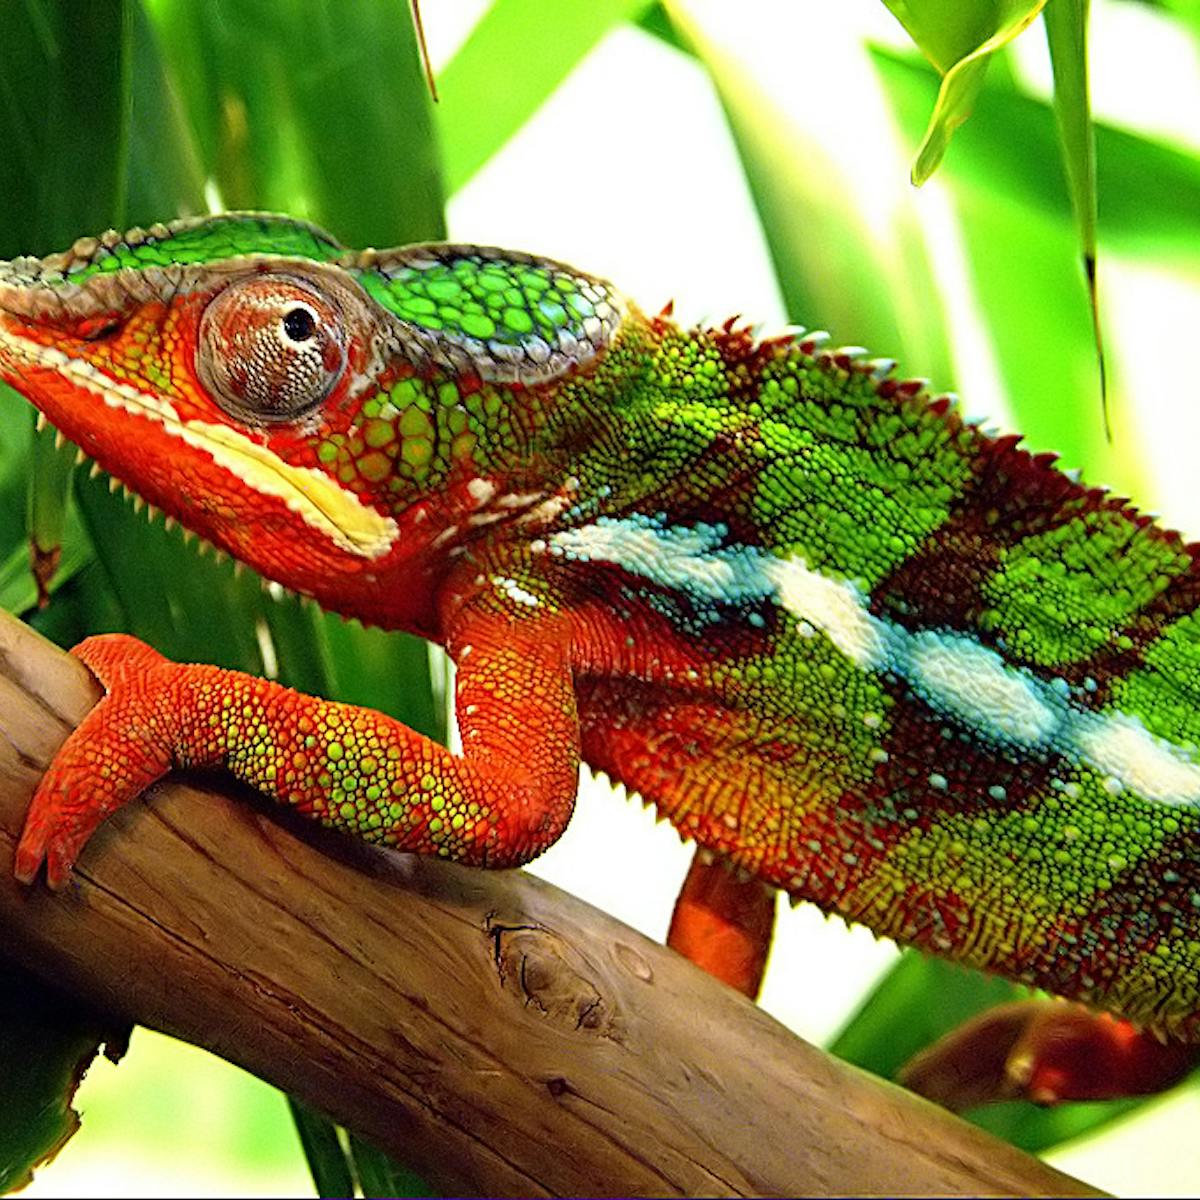 How do chameleons and other creatures change colour